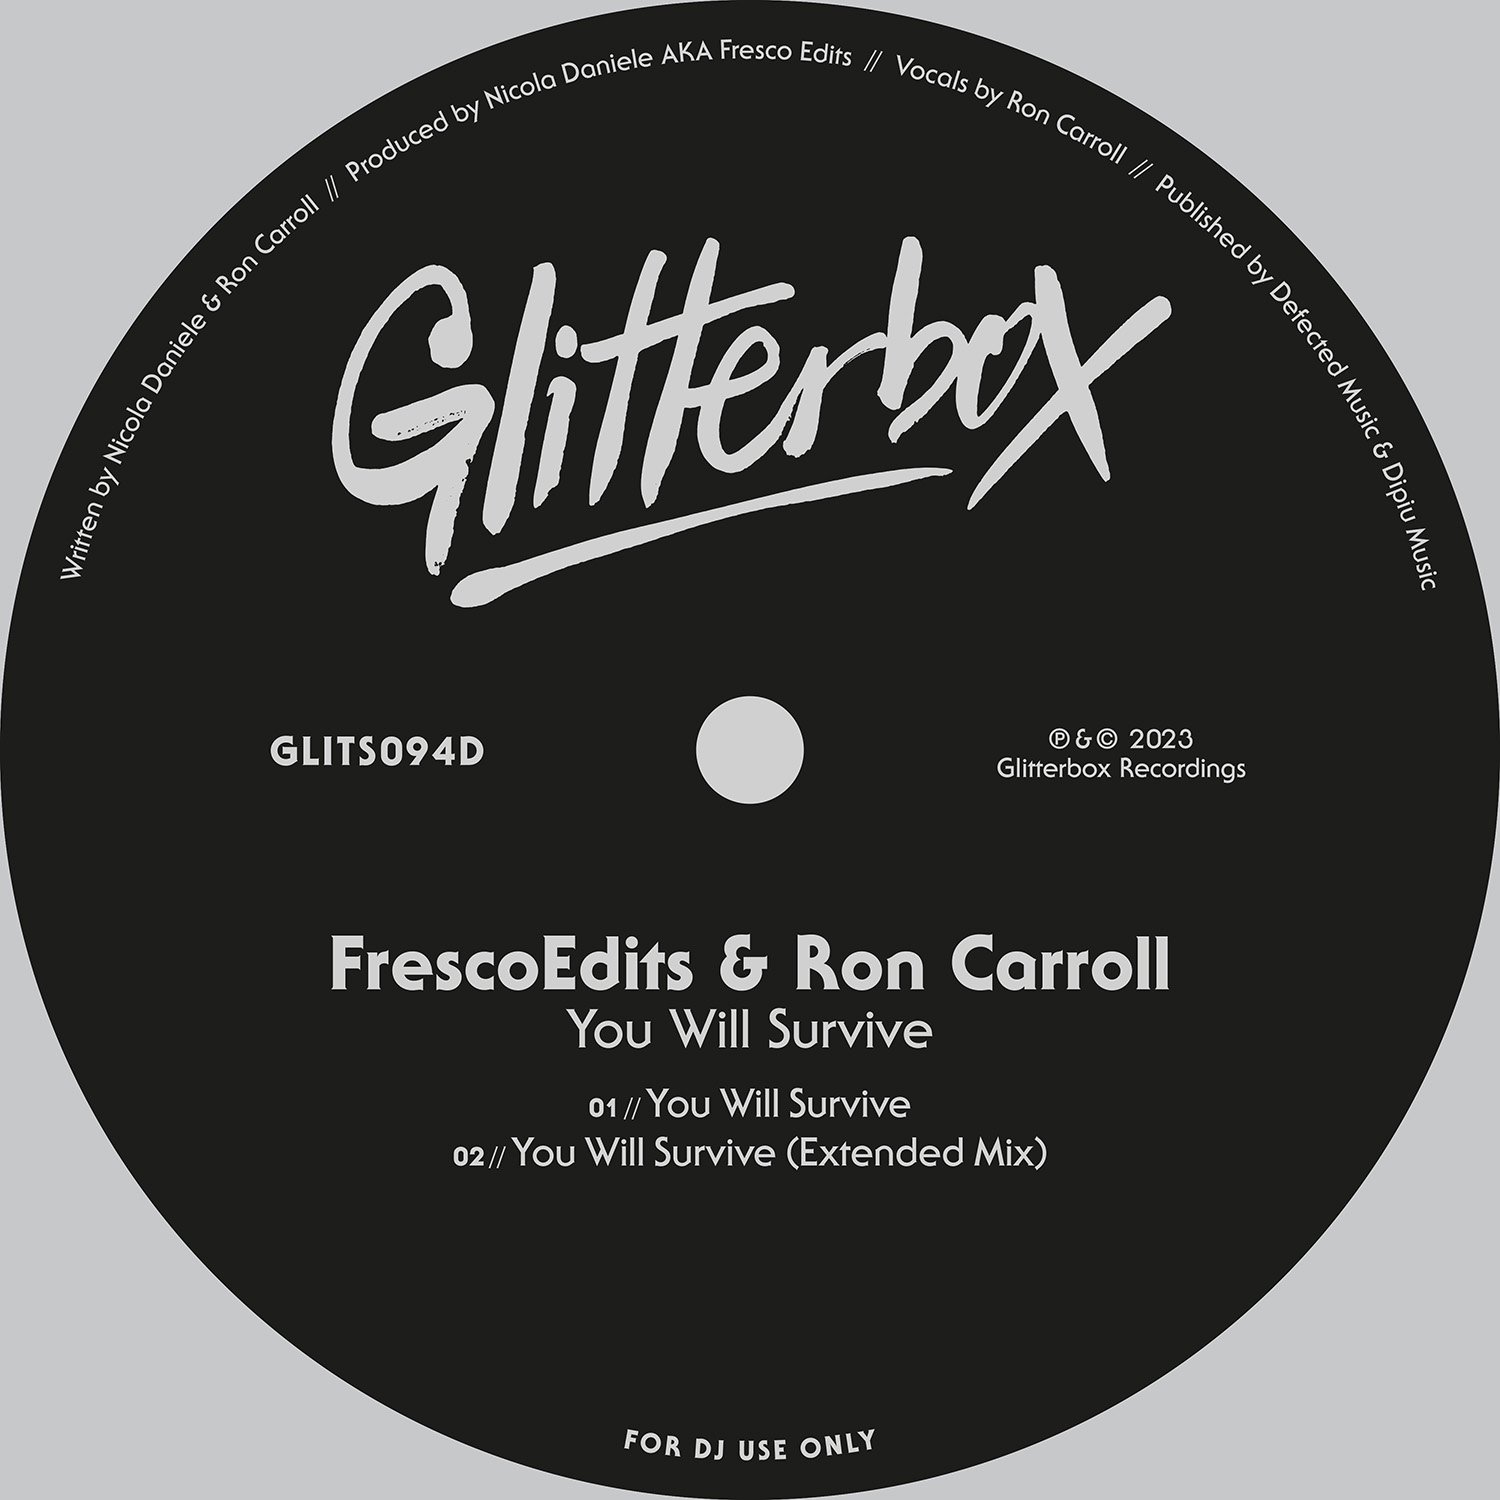 FrescoEdits & Ron Carroll “You Will Survive”